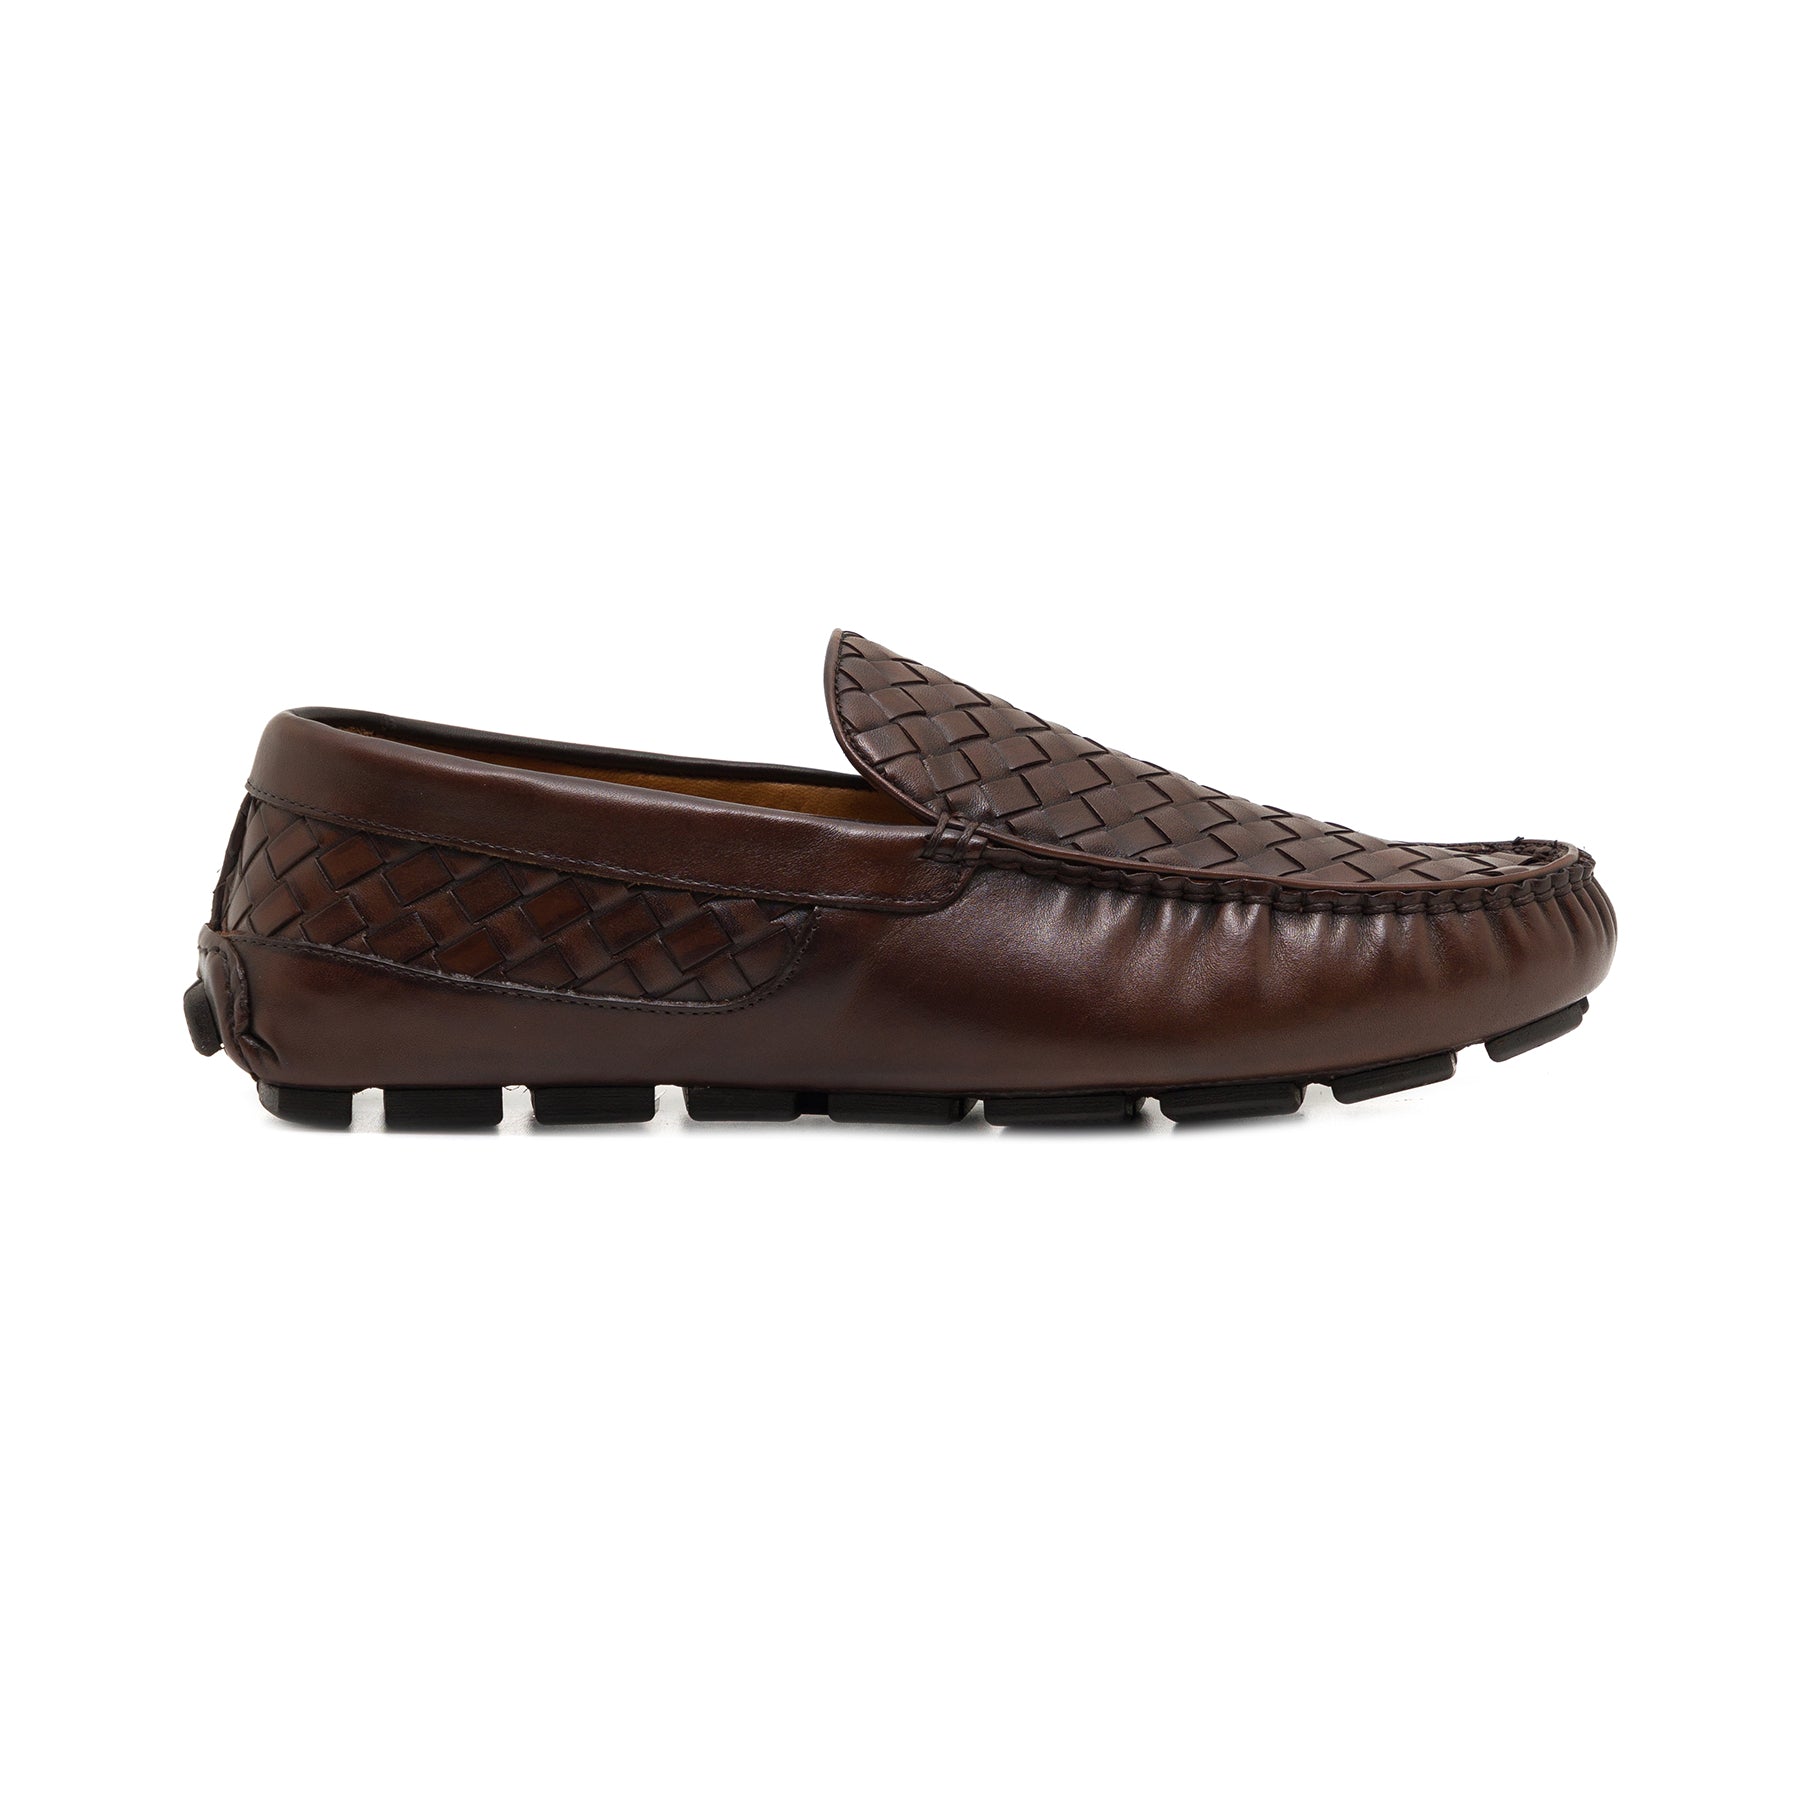 Chariton Brown Loafer